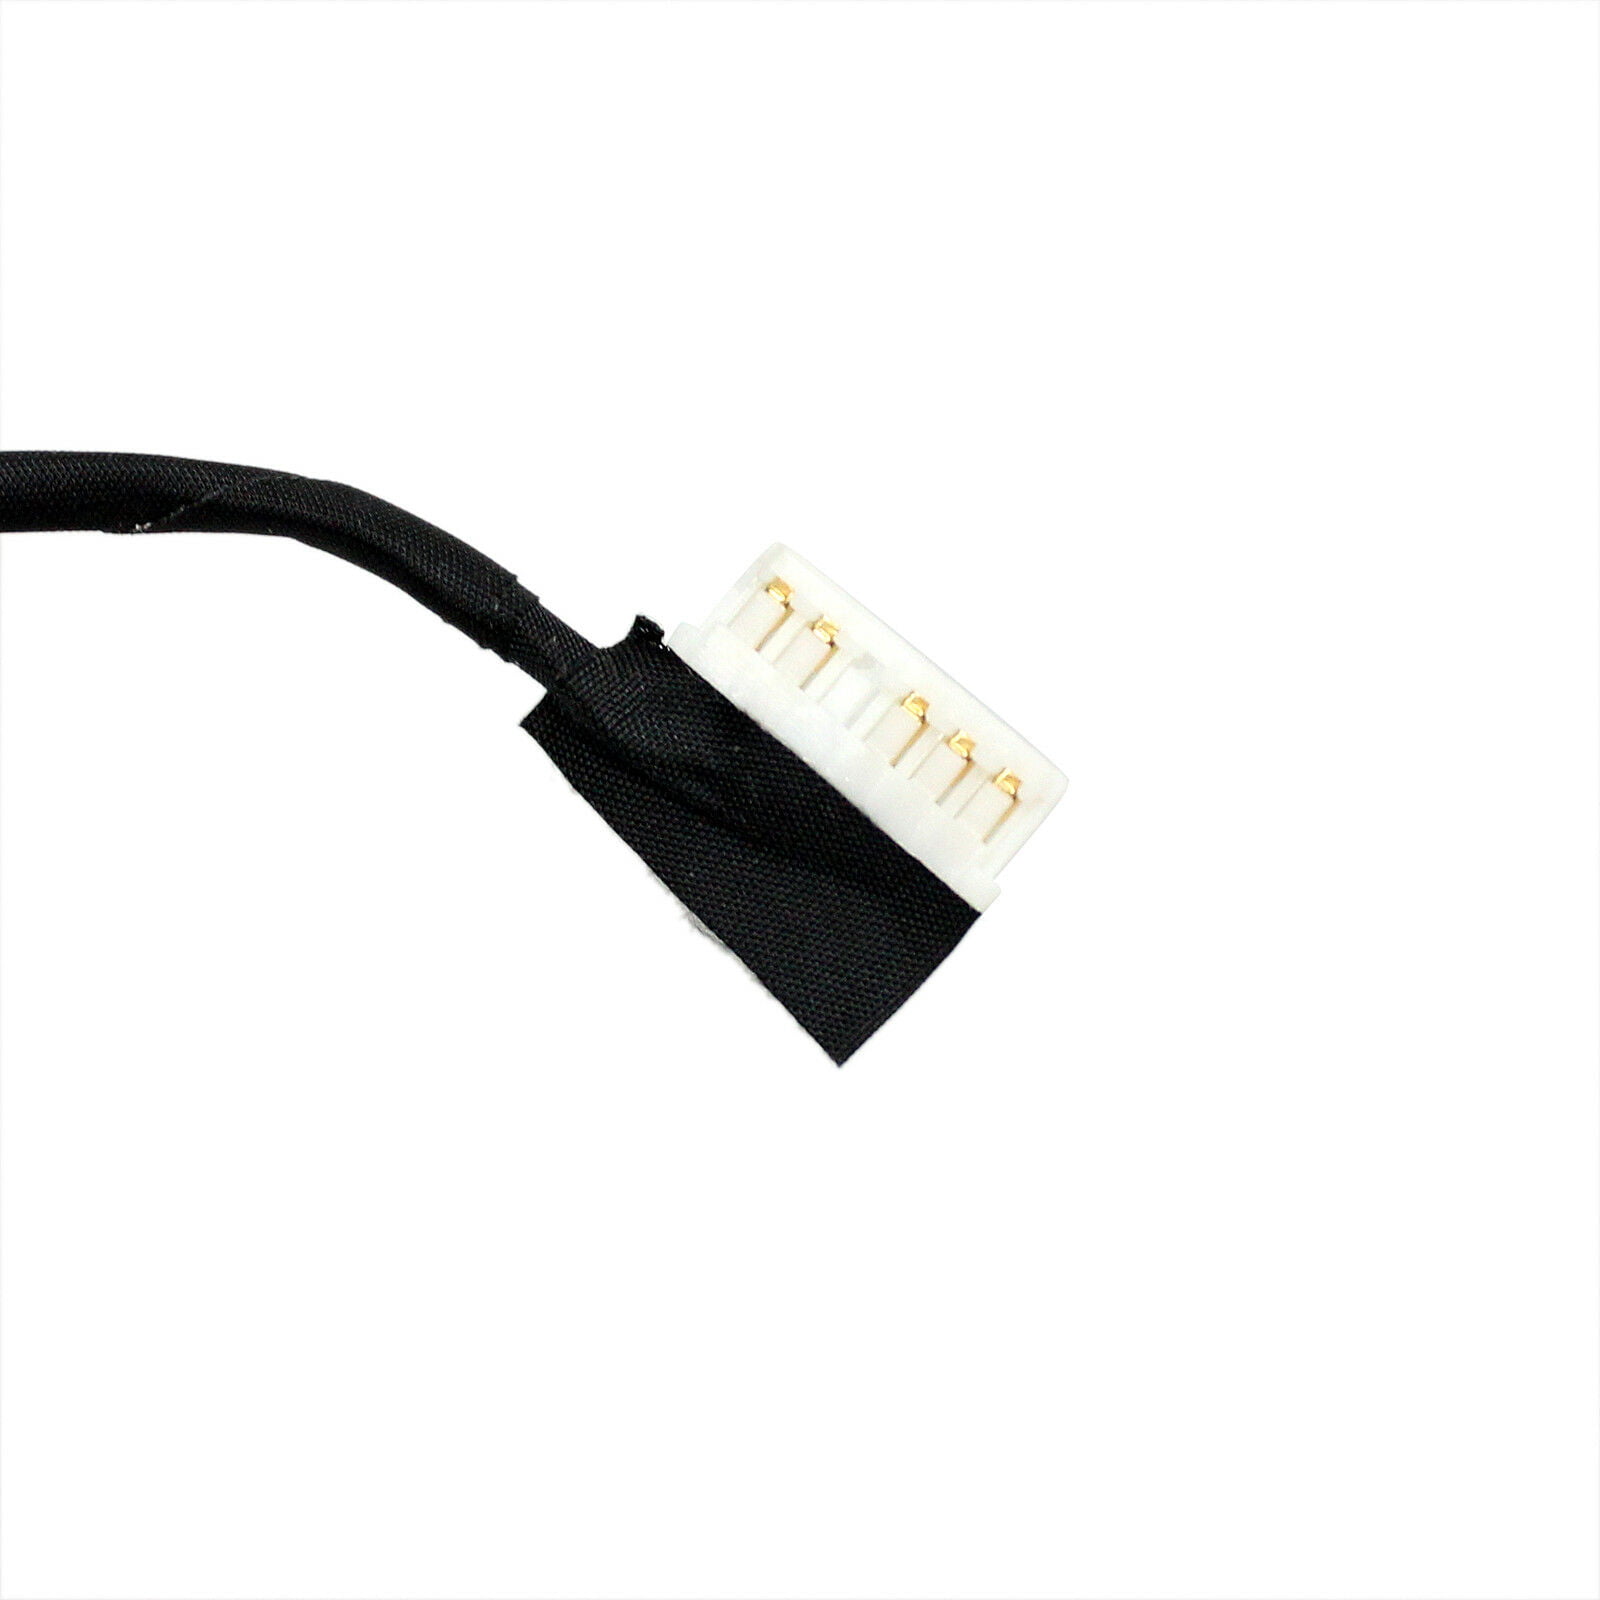 CA31 SZ R6RKM DC30100YN00 DELL POWER DC CONNECTOR WITH CABLE INSPIRON 15 5567